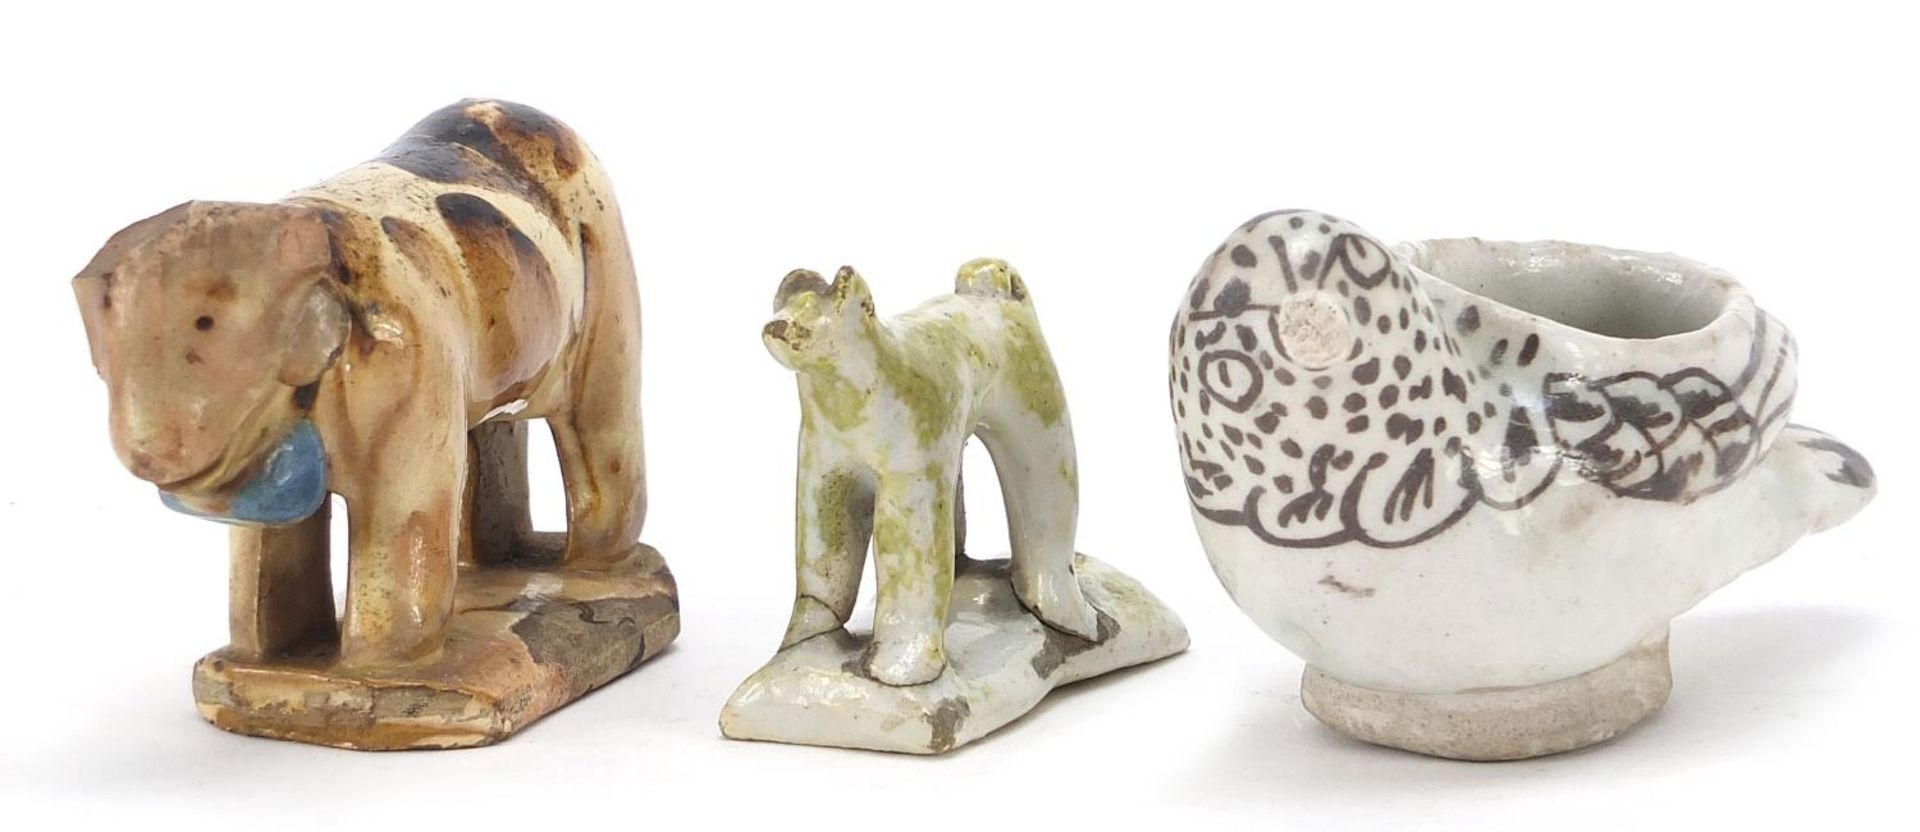 18th century and later ceramics including a dog whistle and cow, the largest 10.5cm in length :